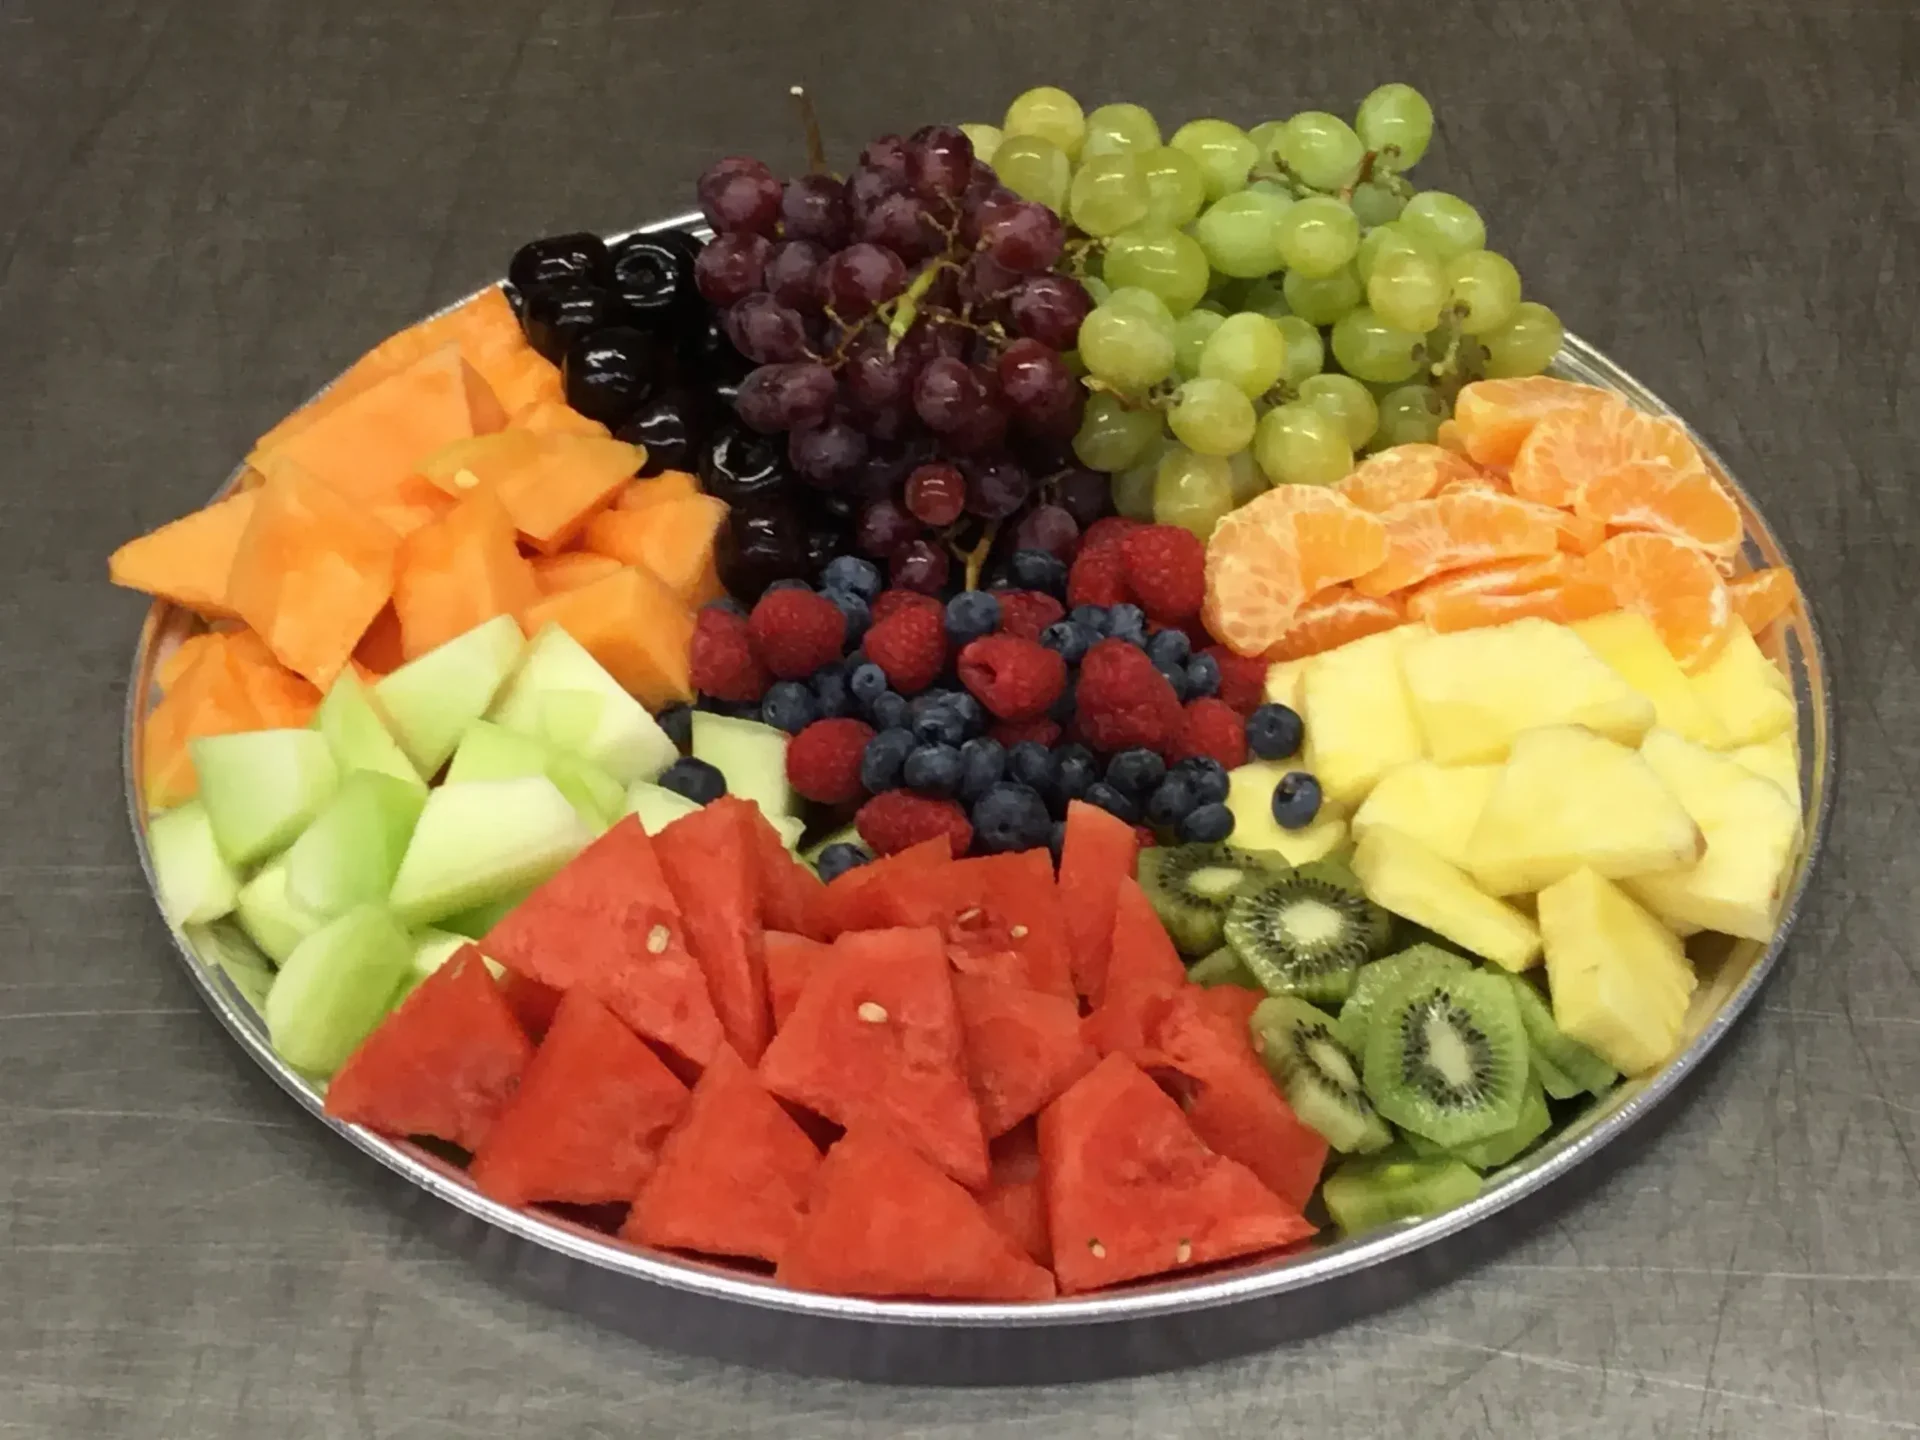 A platter of fruit is shown on the table.